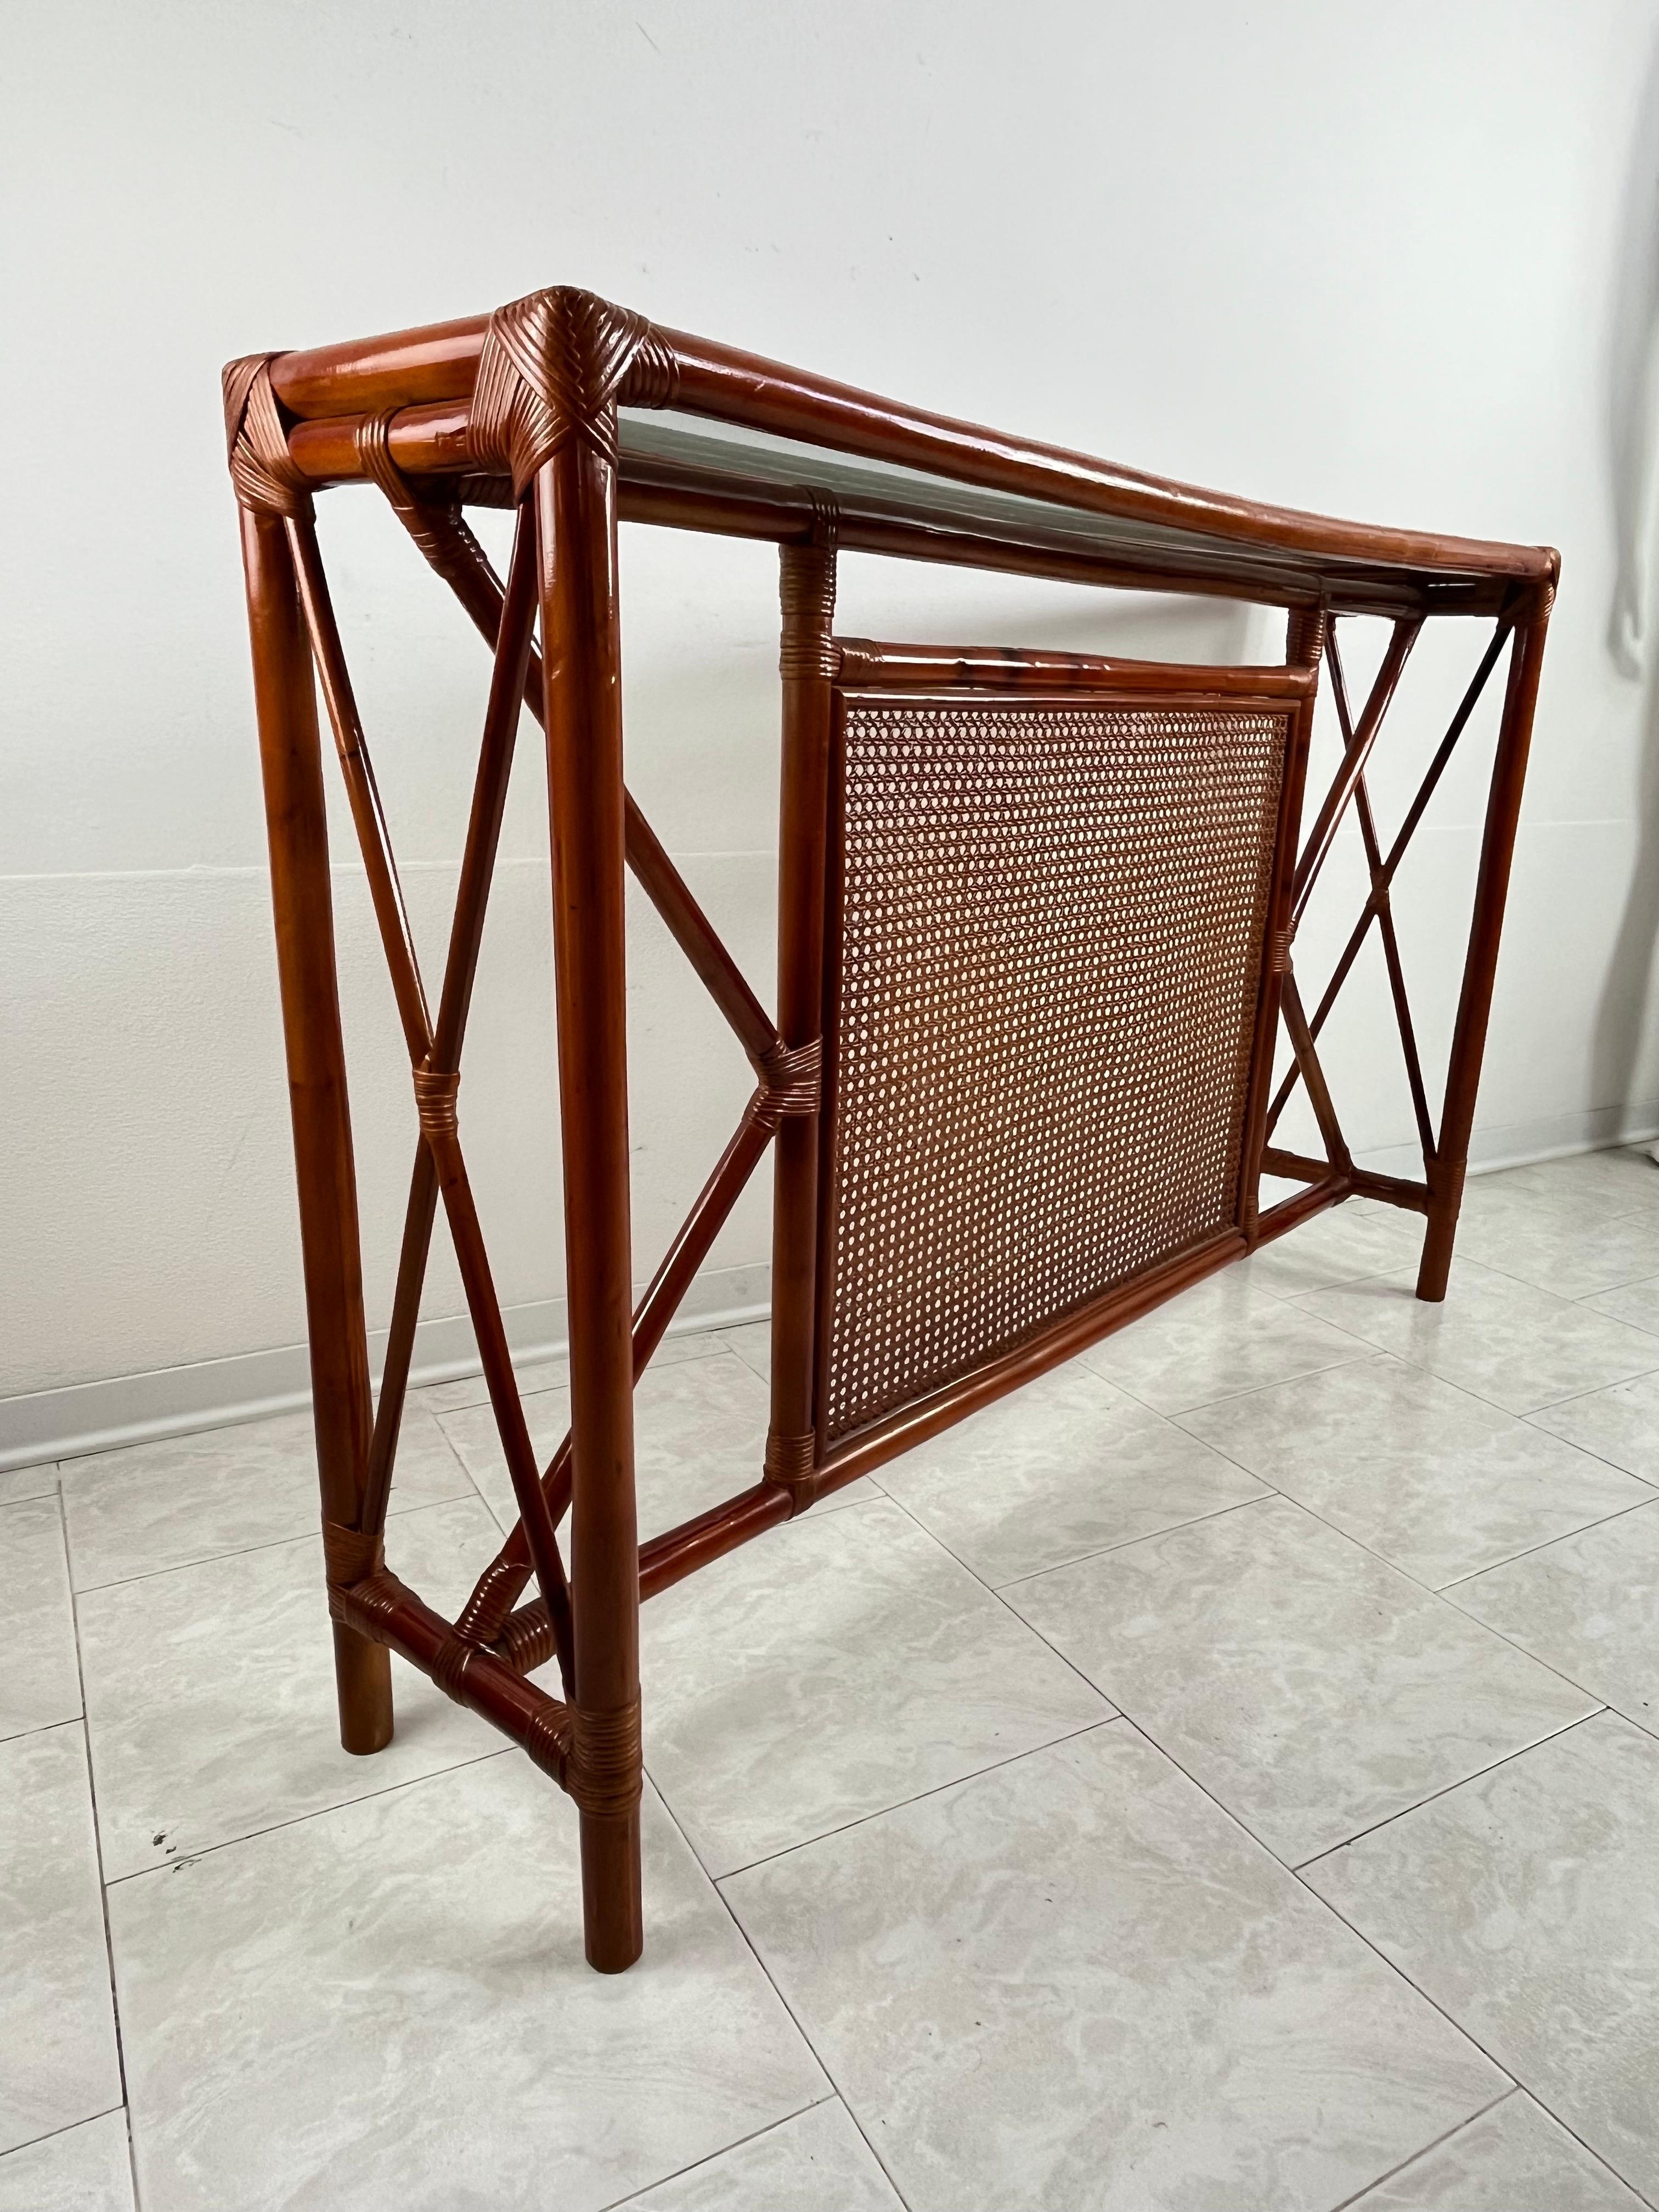 Set of 2 Bamboo and Rattan Console and Mirror Attributed to Franco Albini 1960s For Sale 2